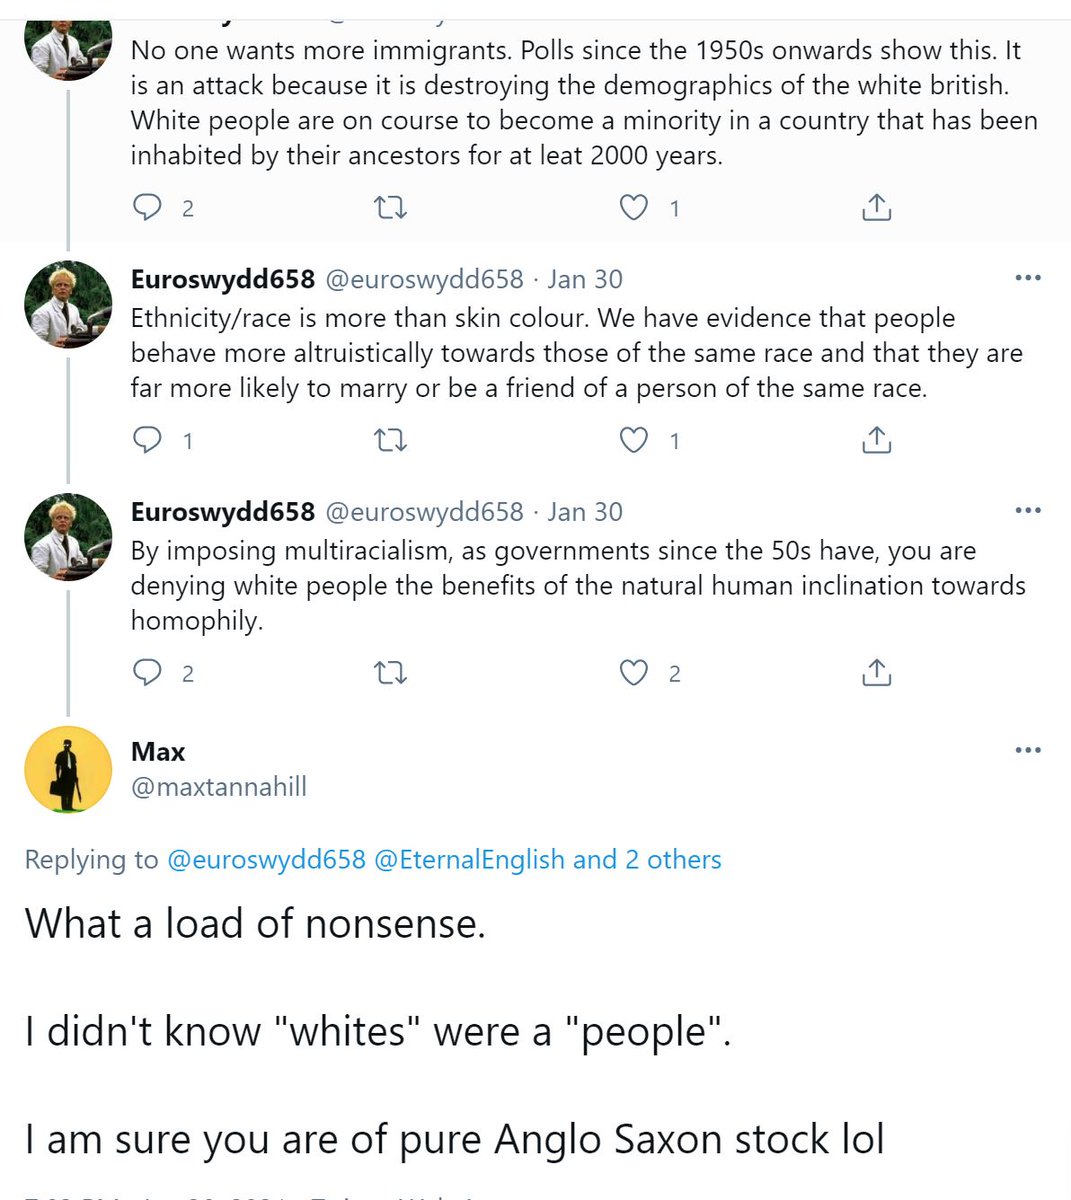 What this demonstrates in many ways is how wrong/inaccurate/racist terms can be normalized. This is the link. Terms attached to wyteness &colonialism get normalized &then get further abused by the far-right. The response at the end of this screenshot is gold.  #medievaltwitter 16/